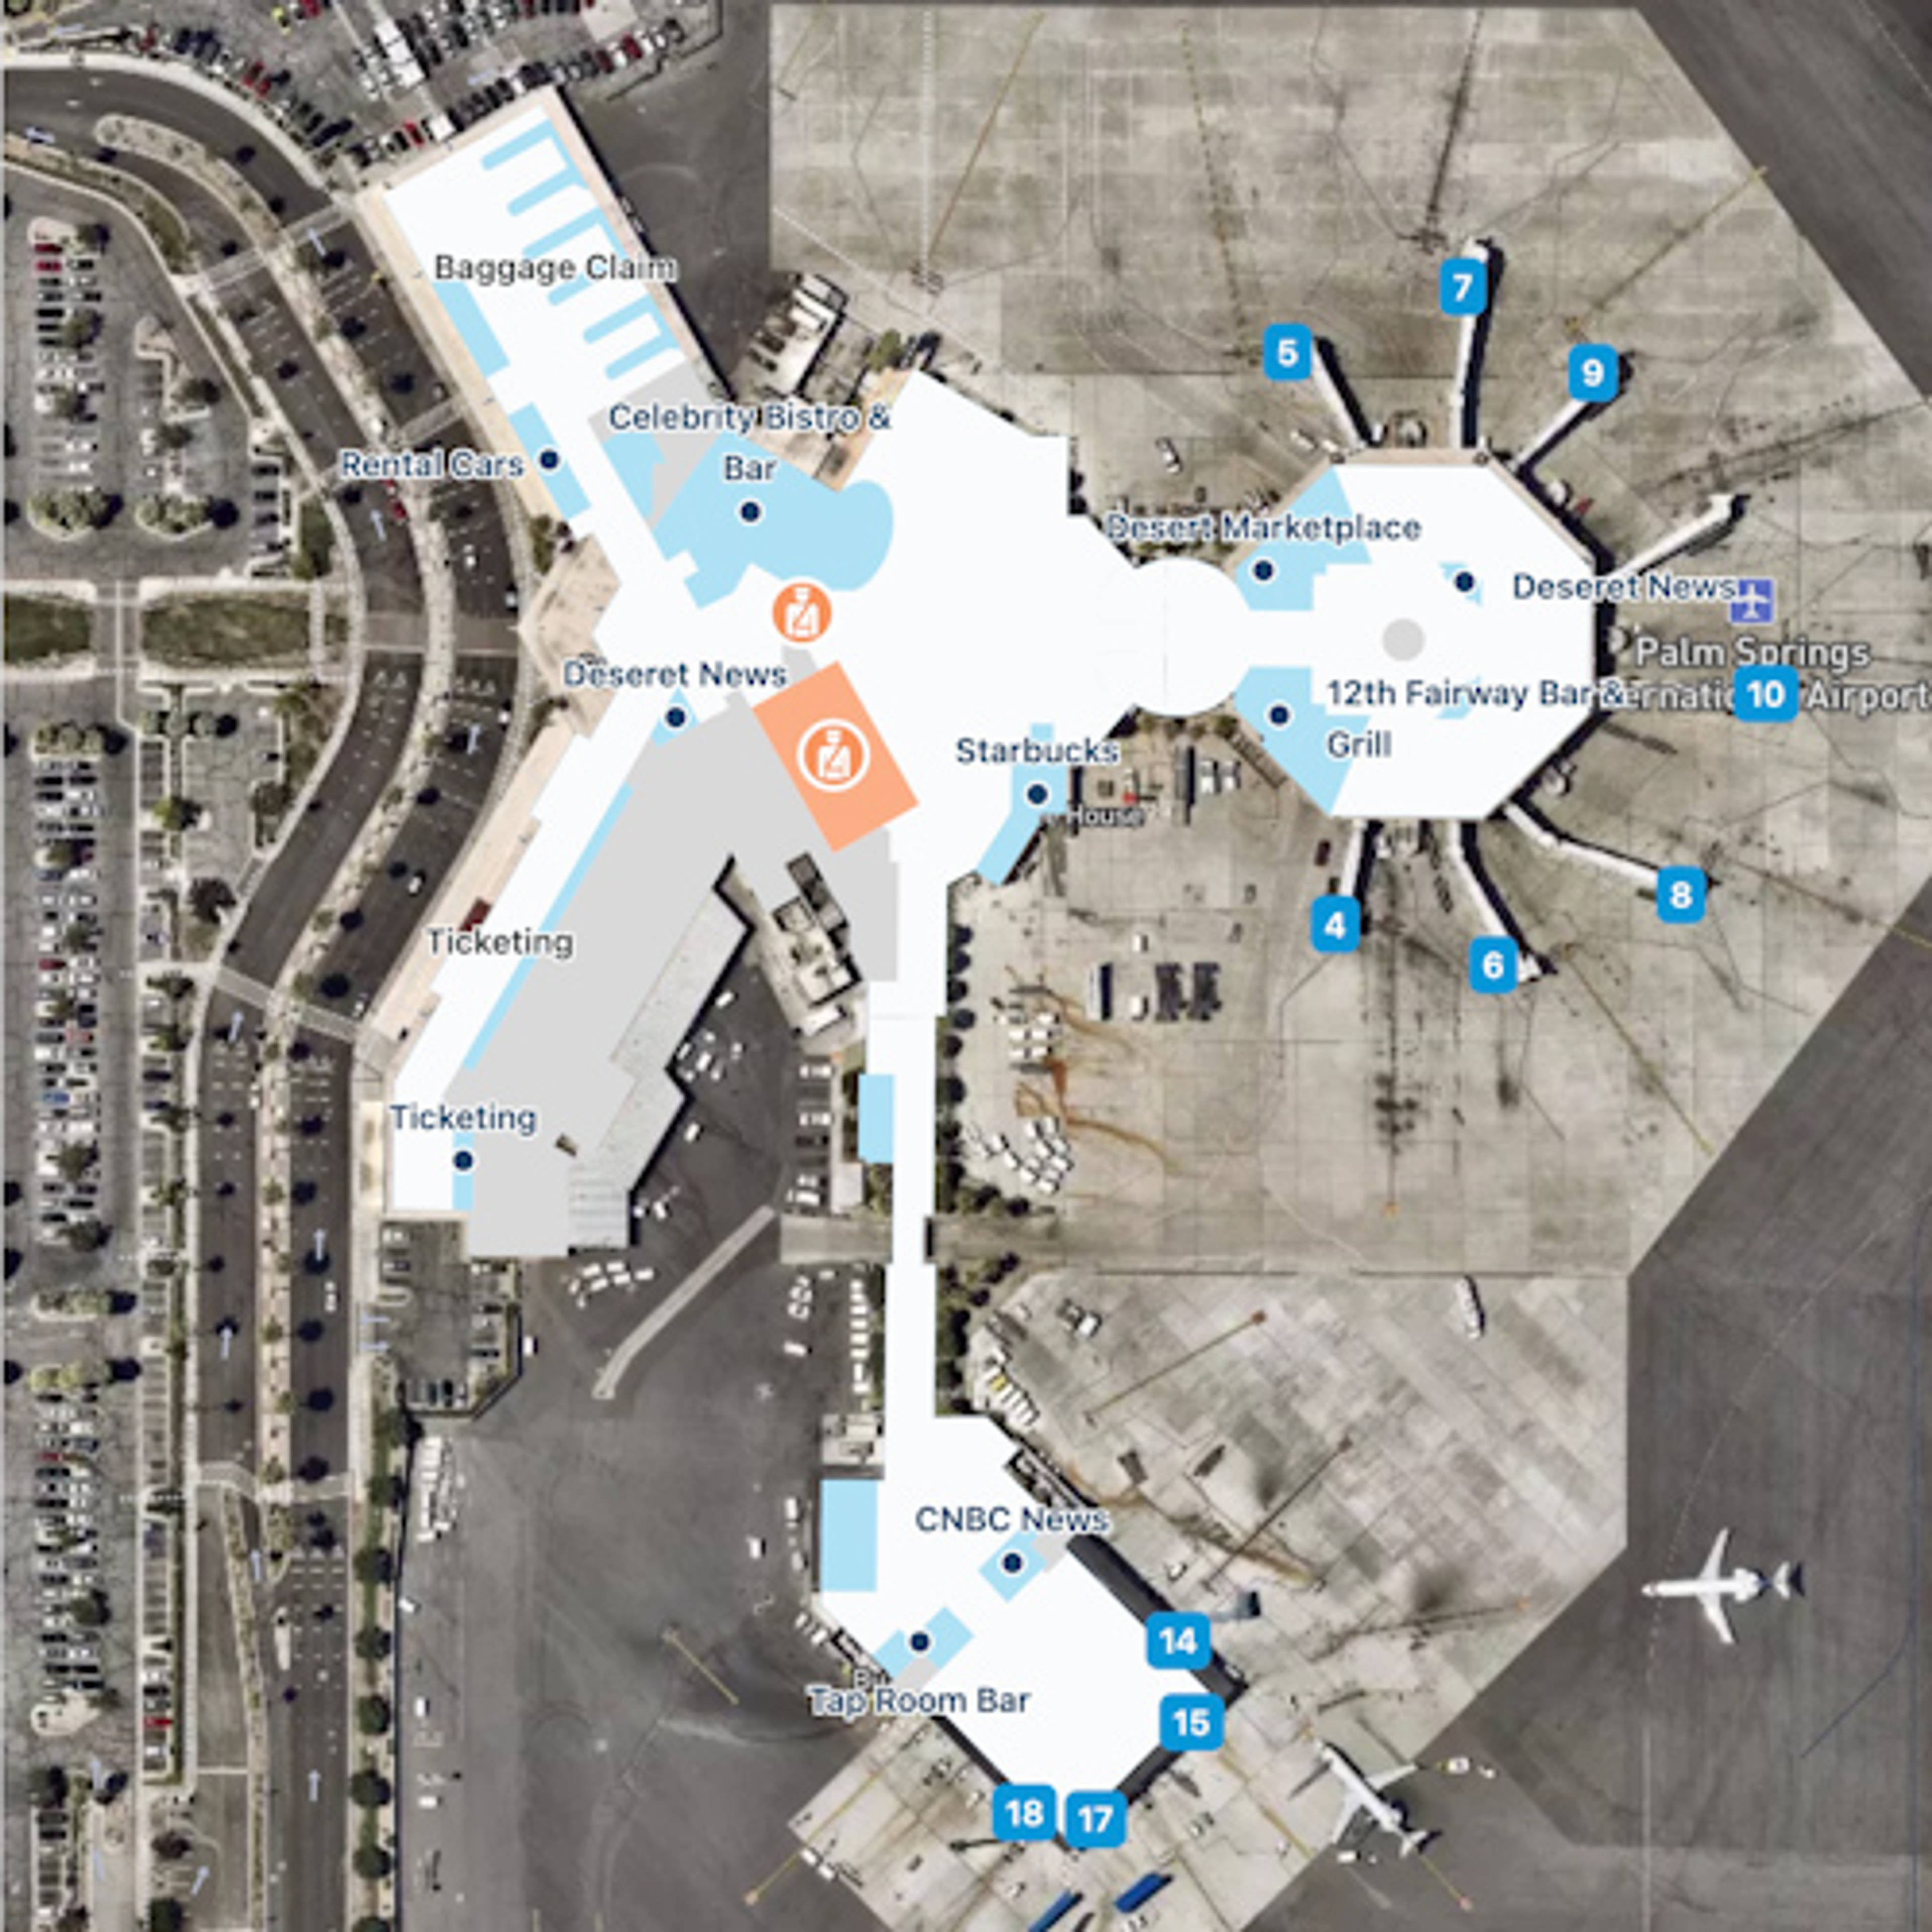 Palm Springs Airport PSP Terminal Overview Map